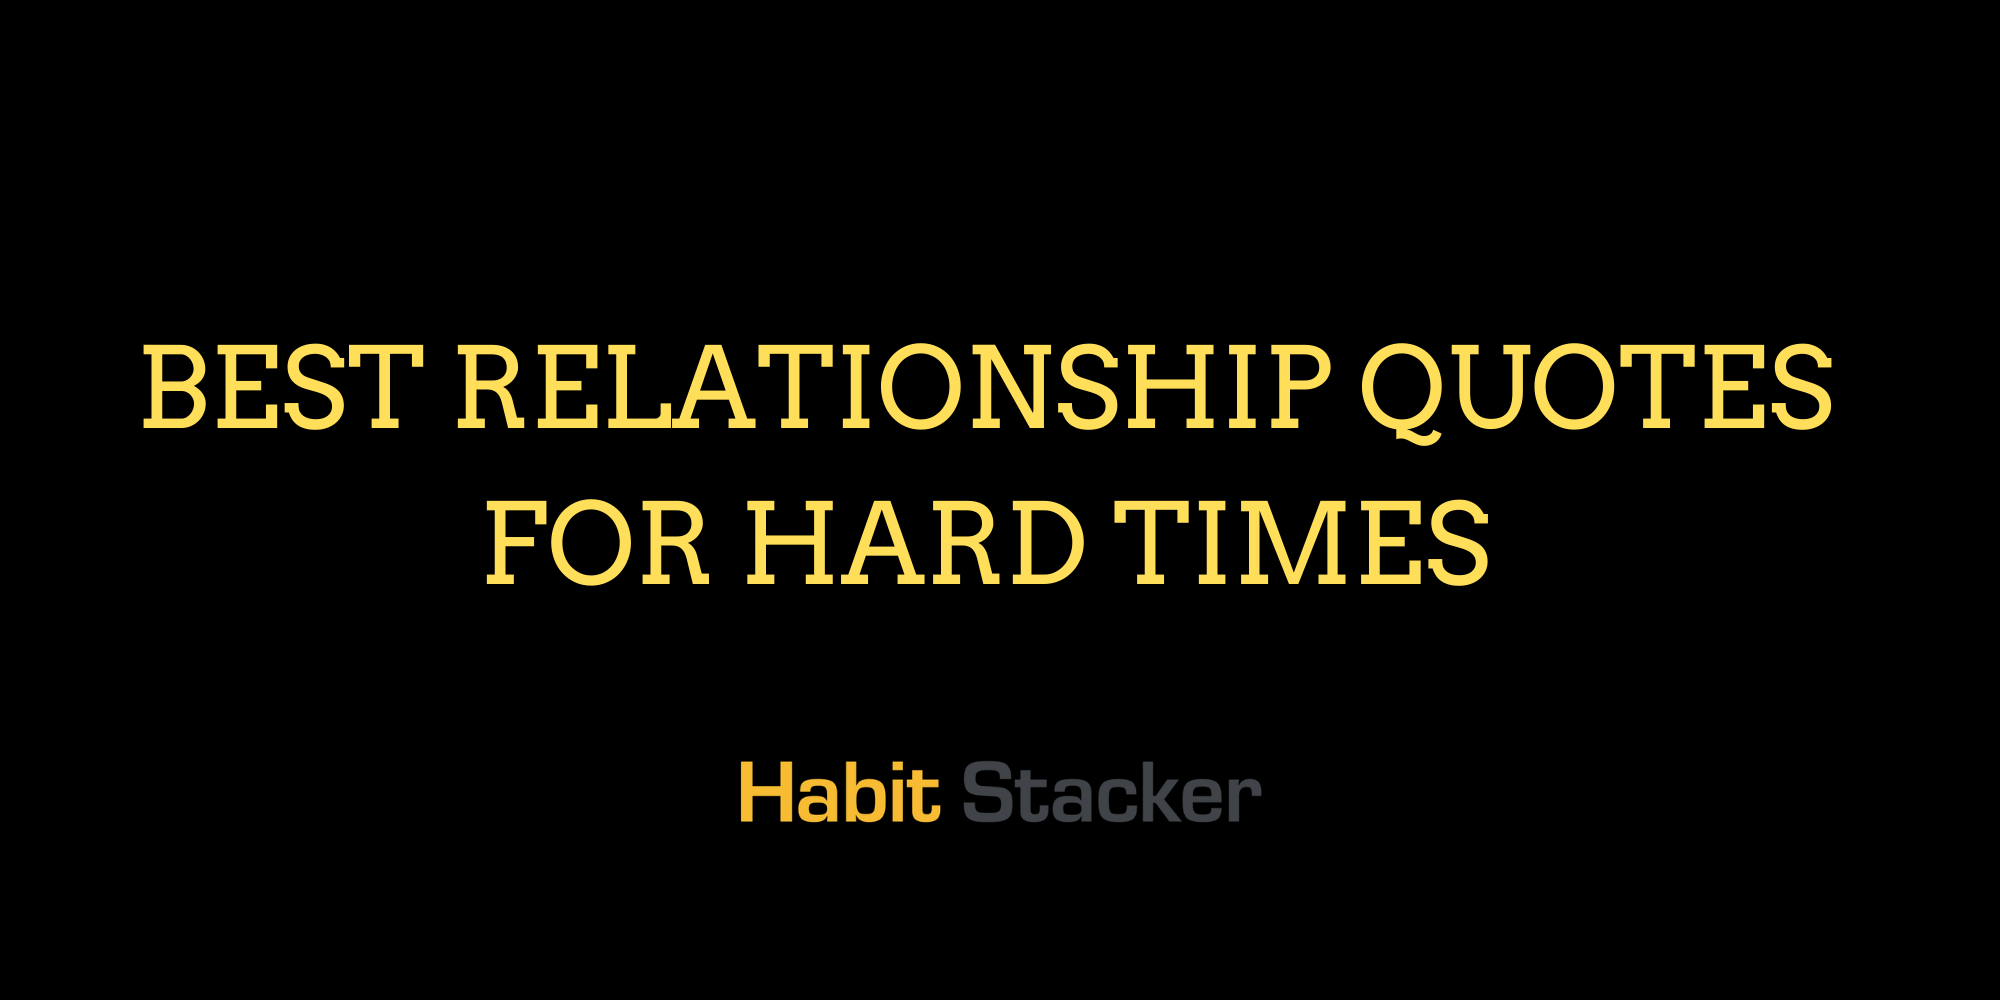 33 Best Relationship Quotes For Hard Times Habit Stacker